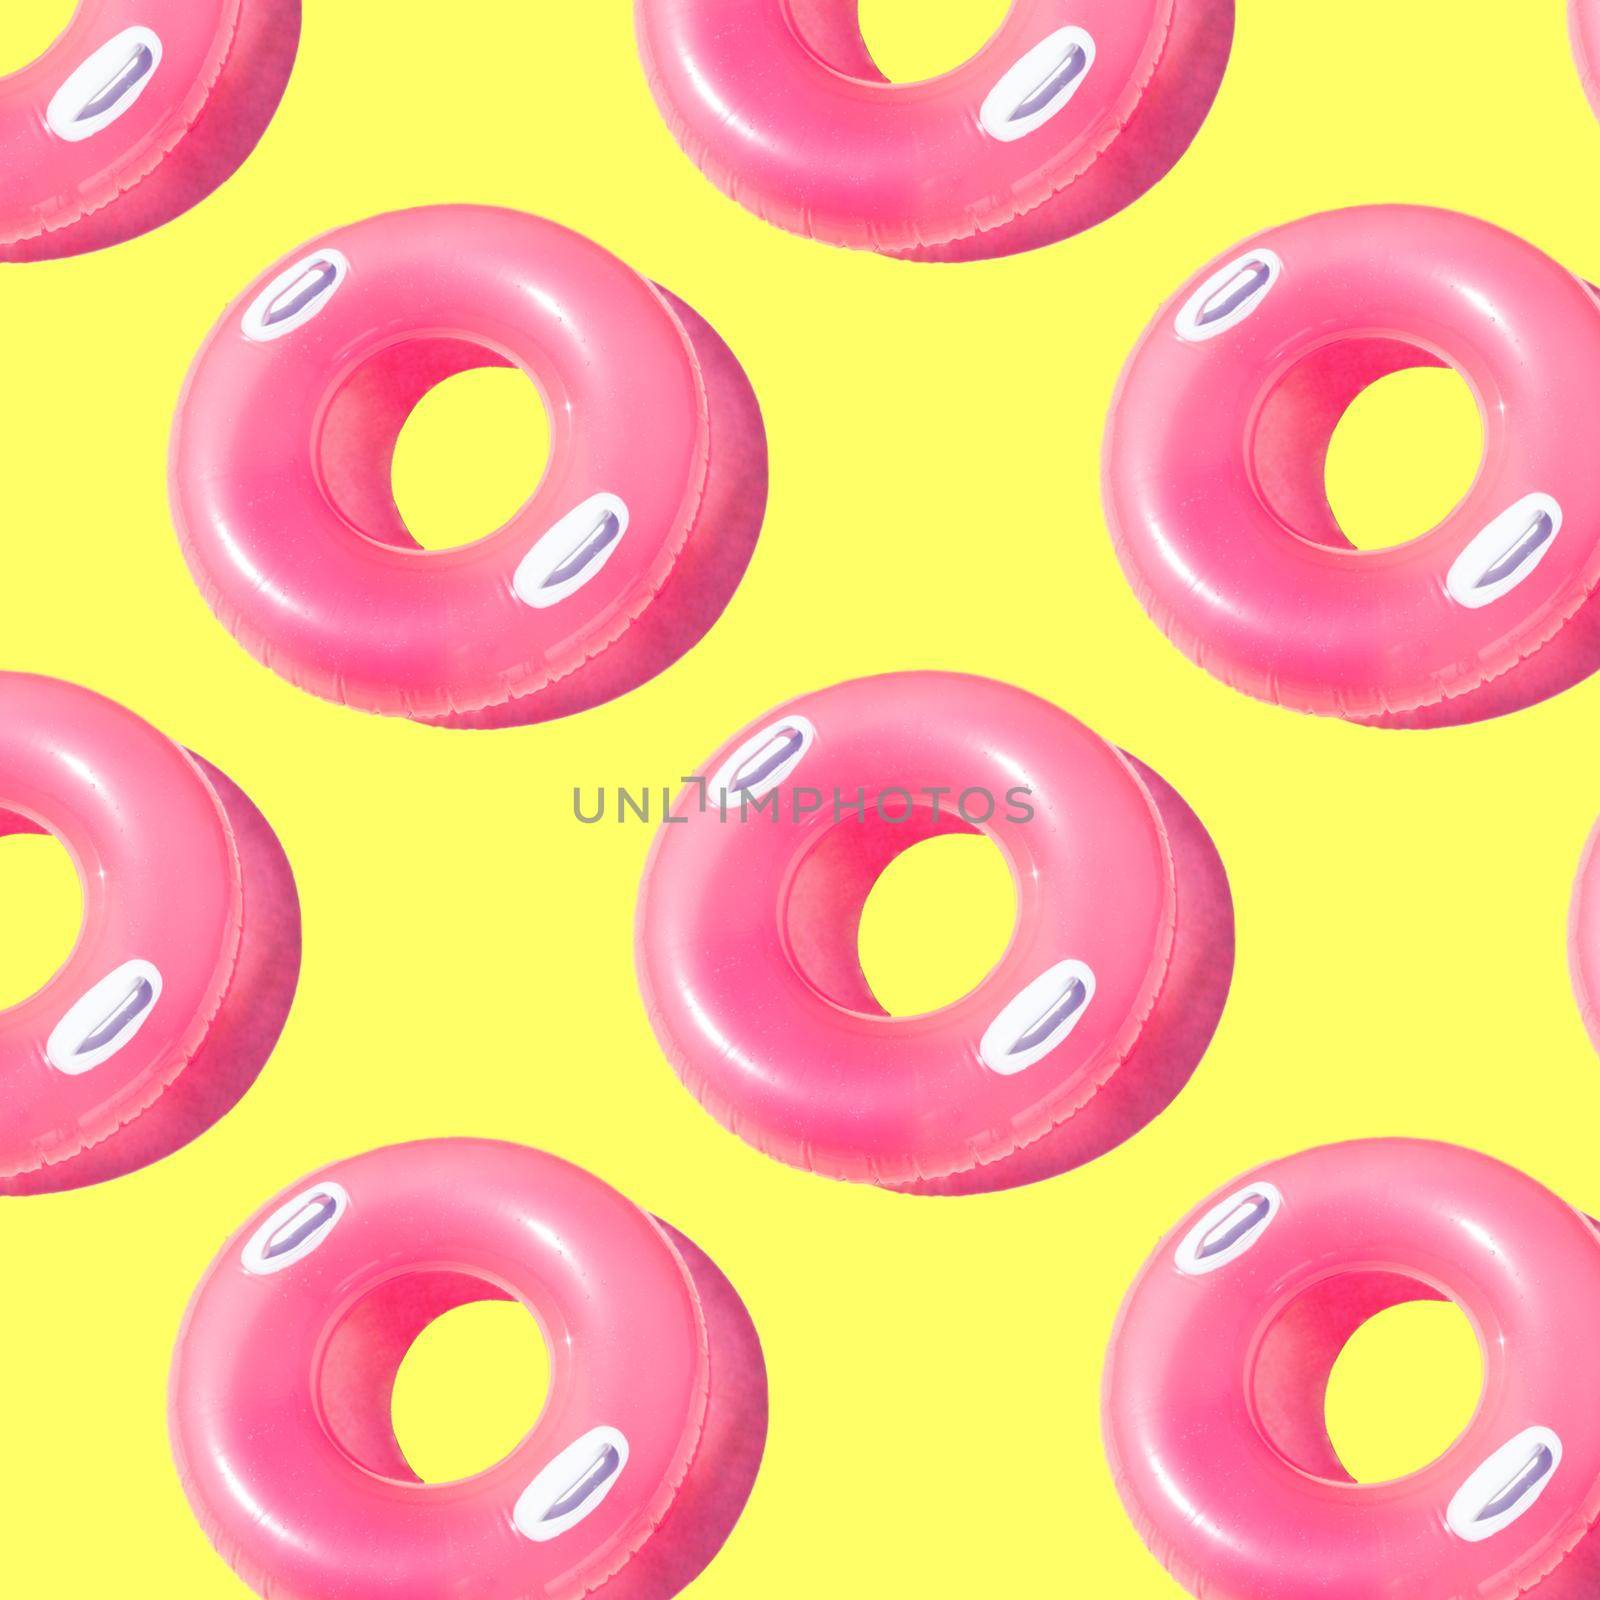 Bright pink inflatable circle with white handles and a shadow on a yellow background pattern